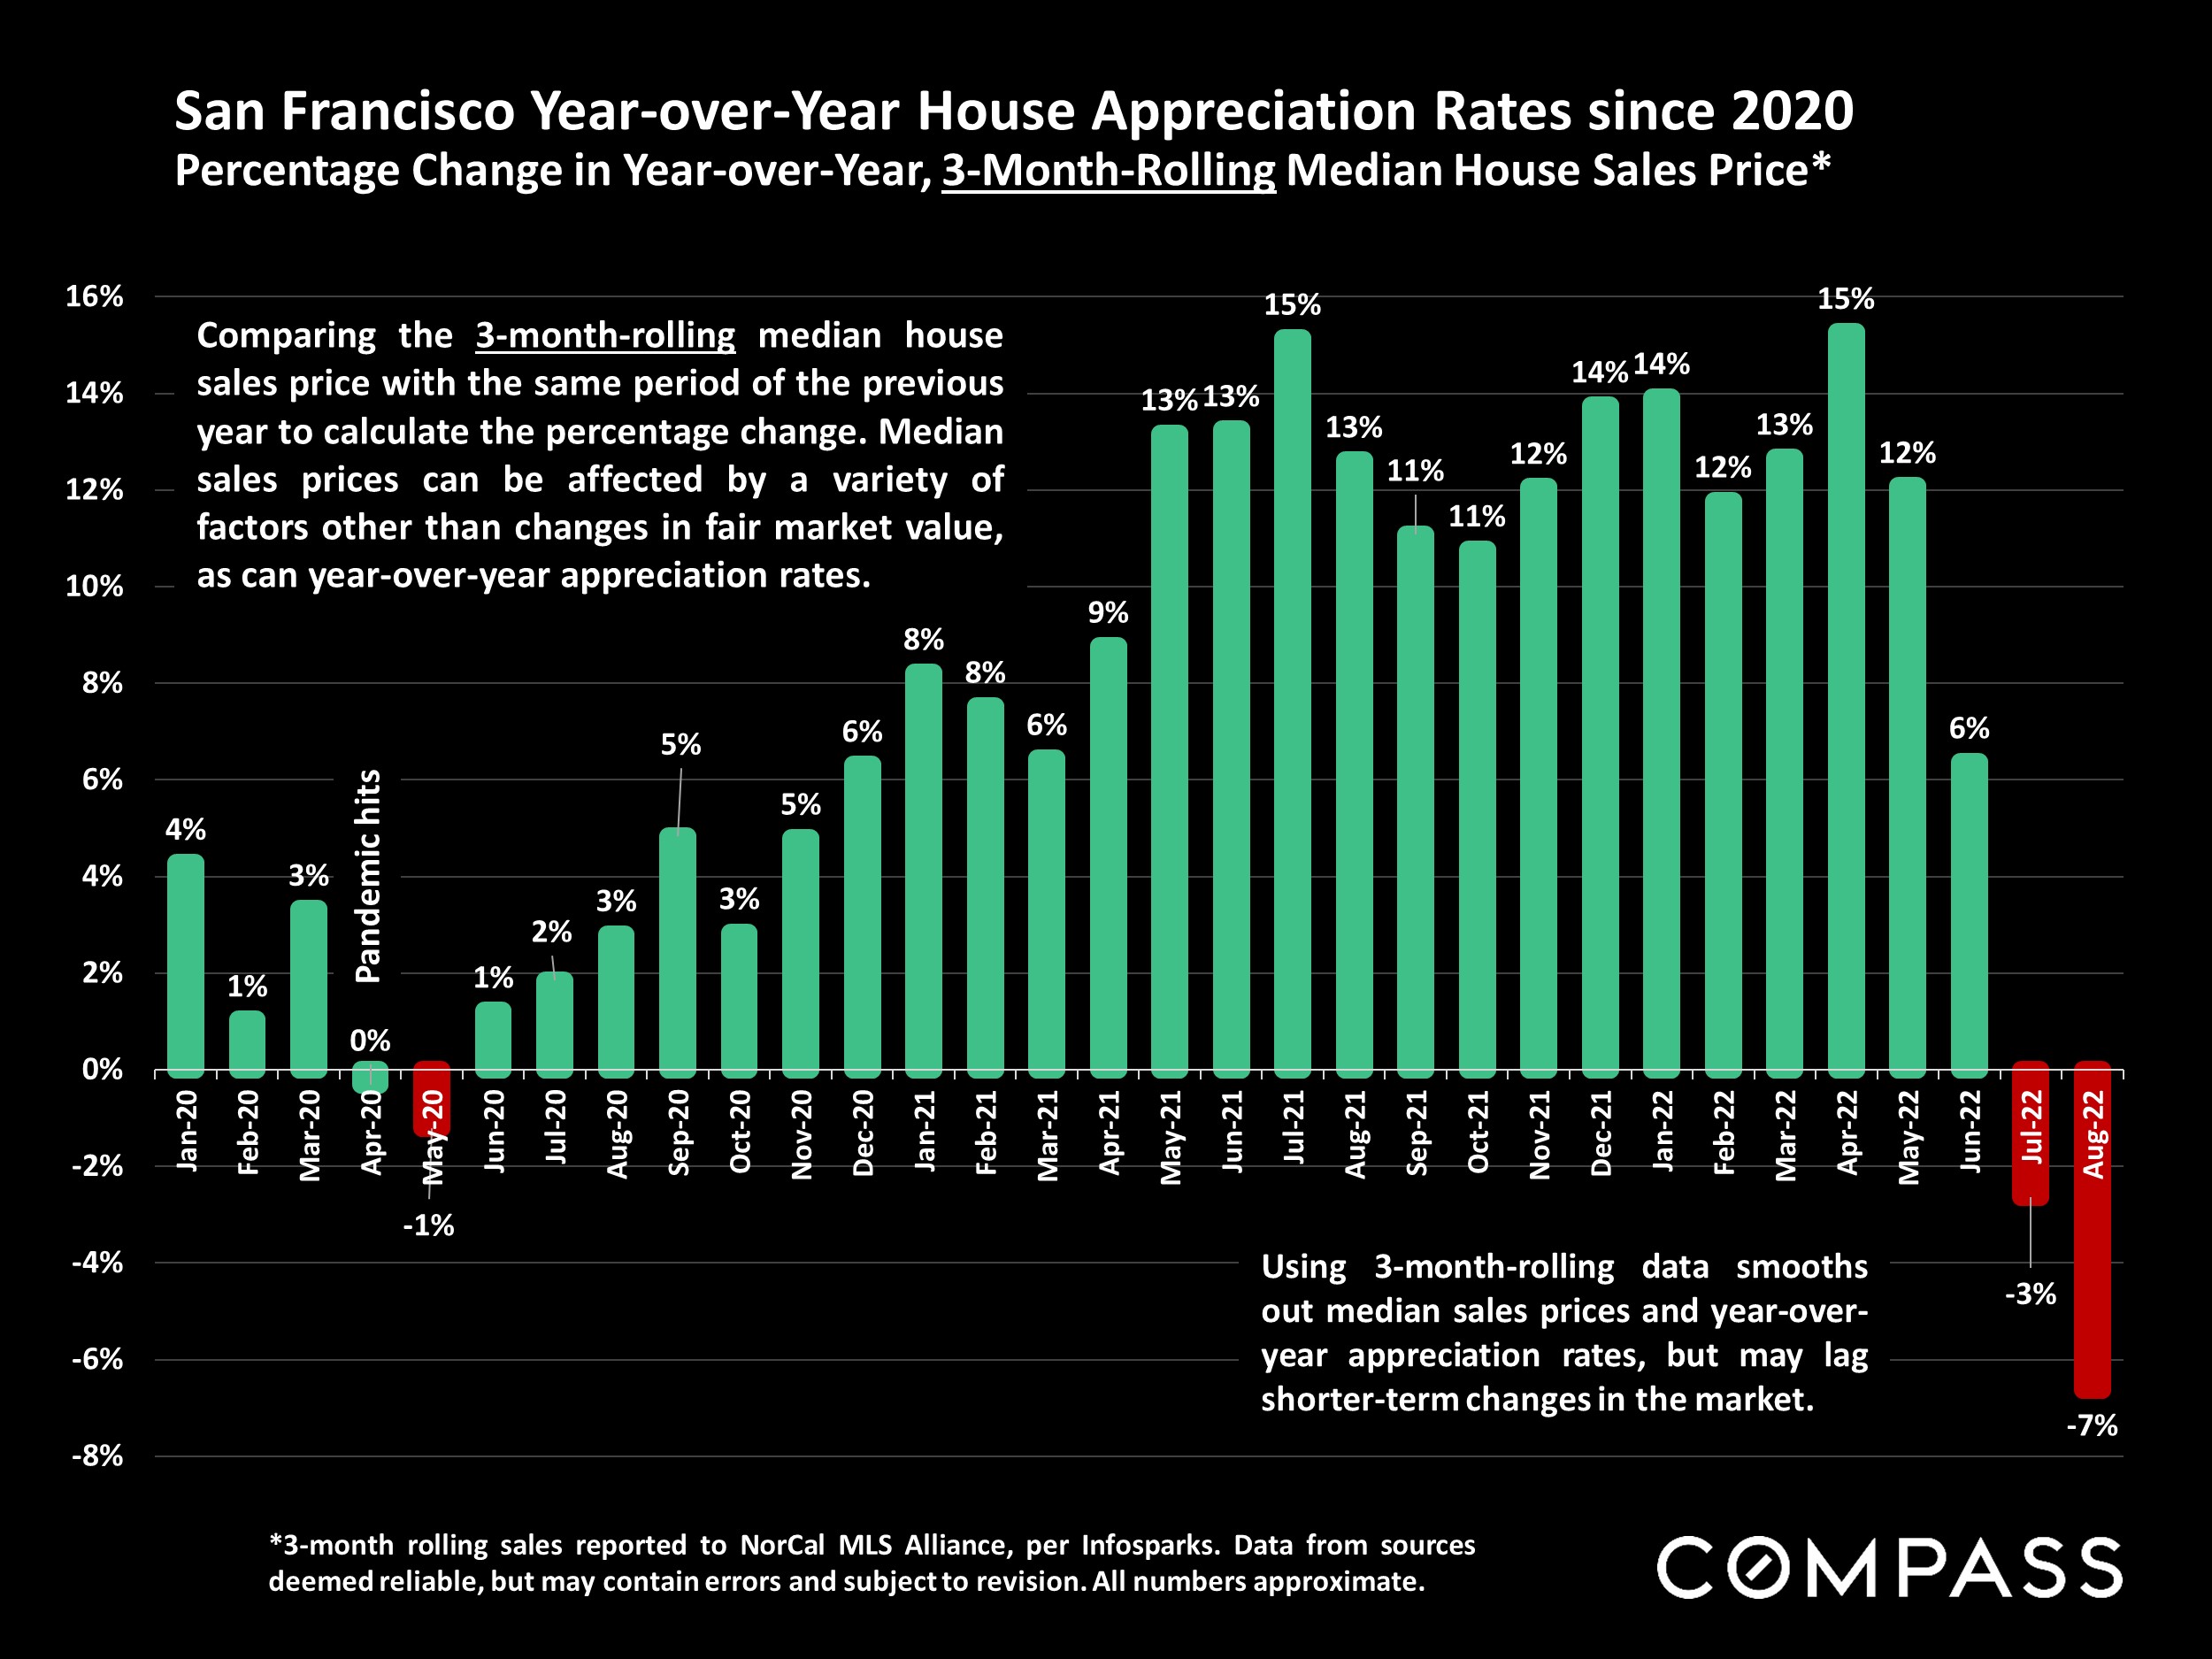 San Francisco Year-over-Year House Appreciation Rates since 2020